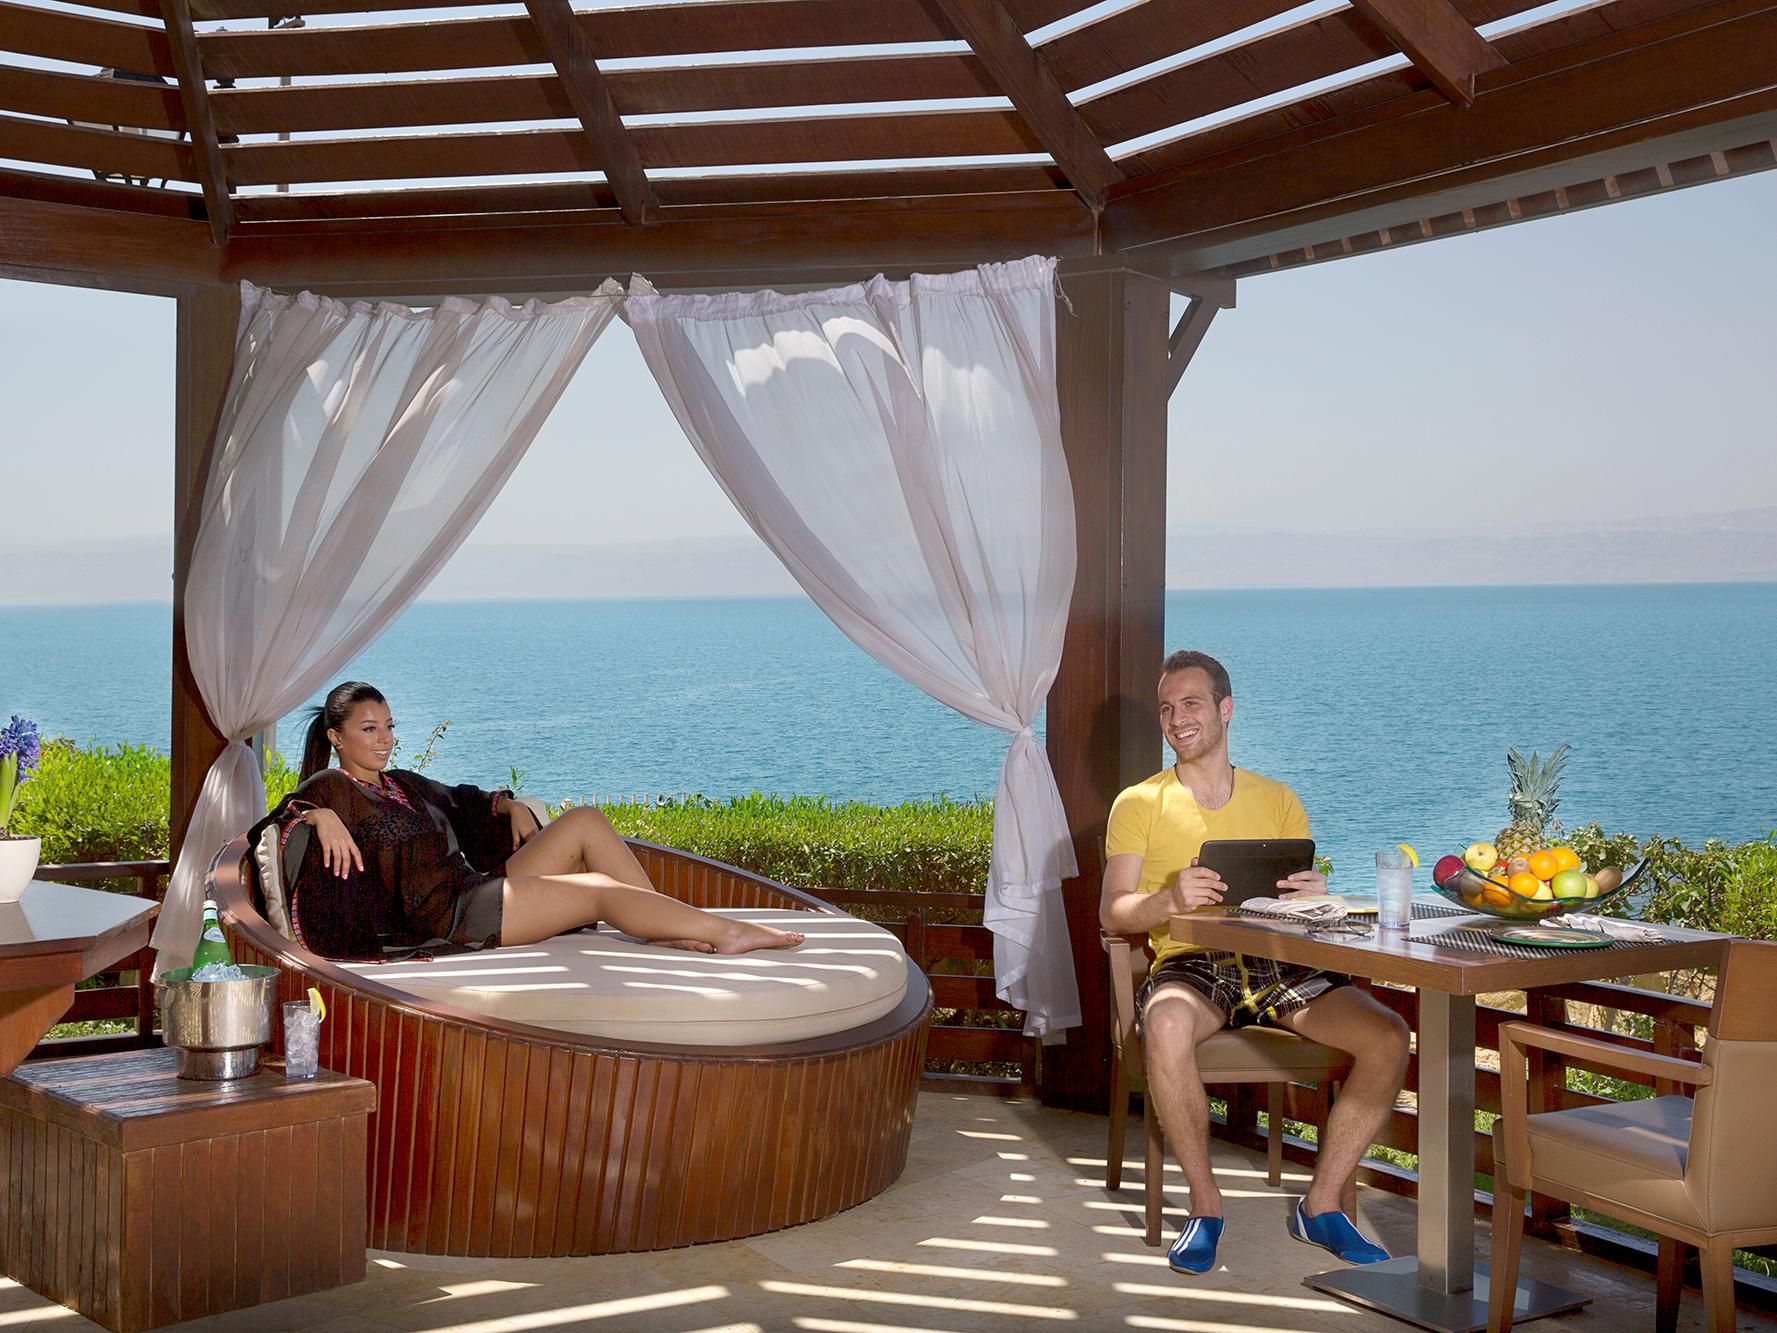 It's always the right time to enjoy some luxurious privacy at one of our Beach Cabanas with a private butler and high-end culinary experience!